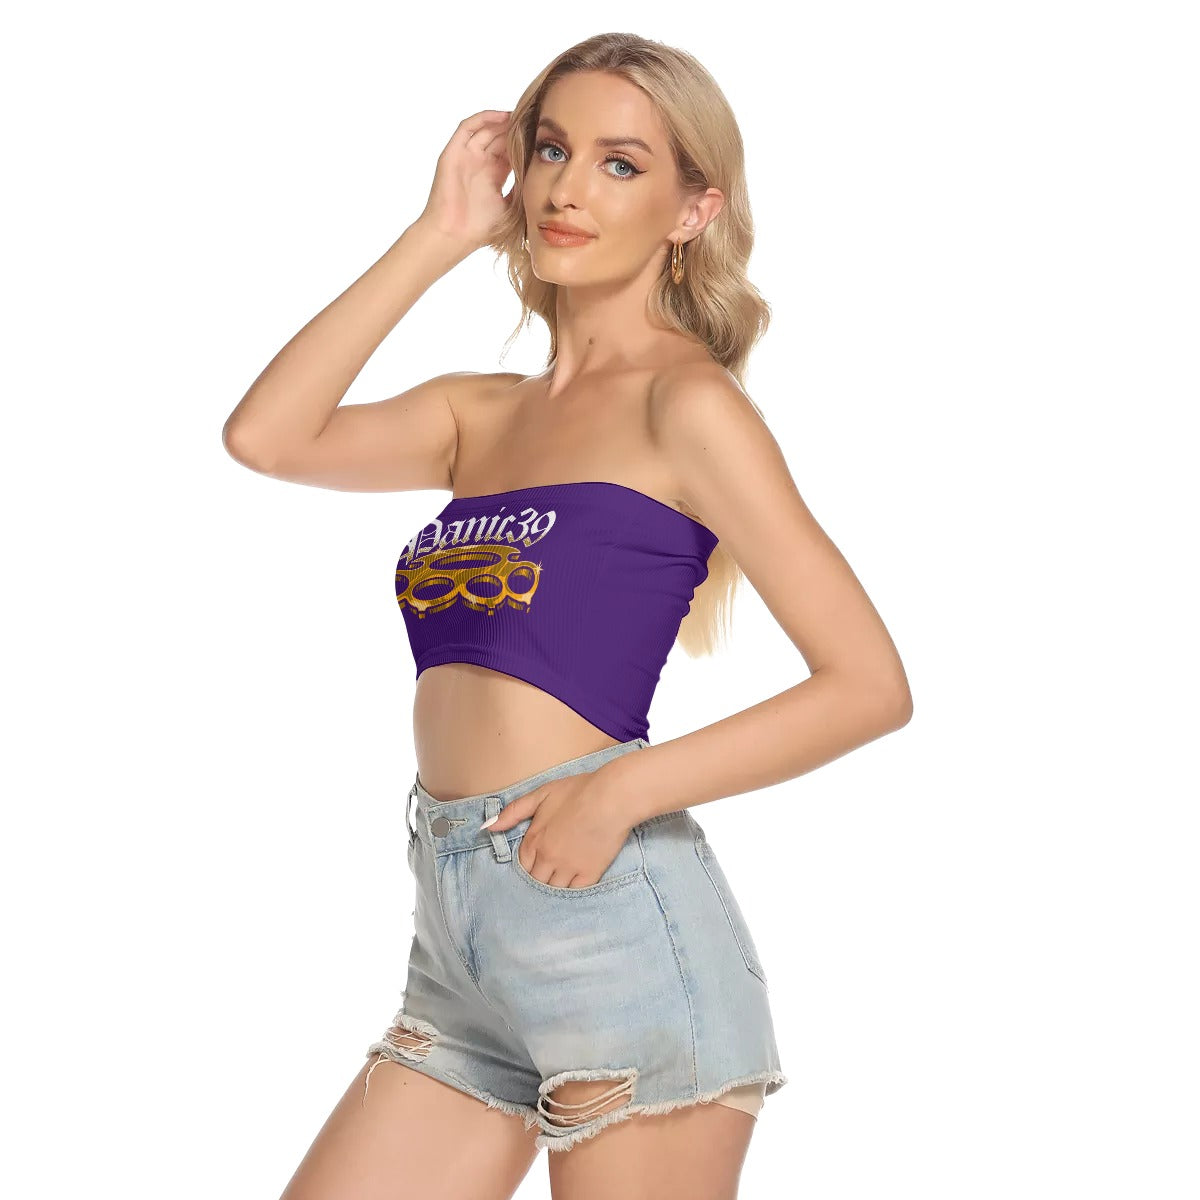 THE KNUCKLES TUBE TOP IN PURPLE - Panic 39